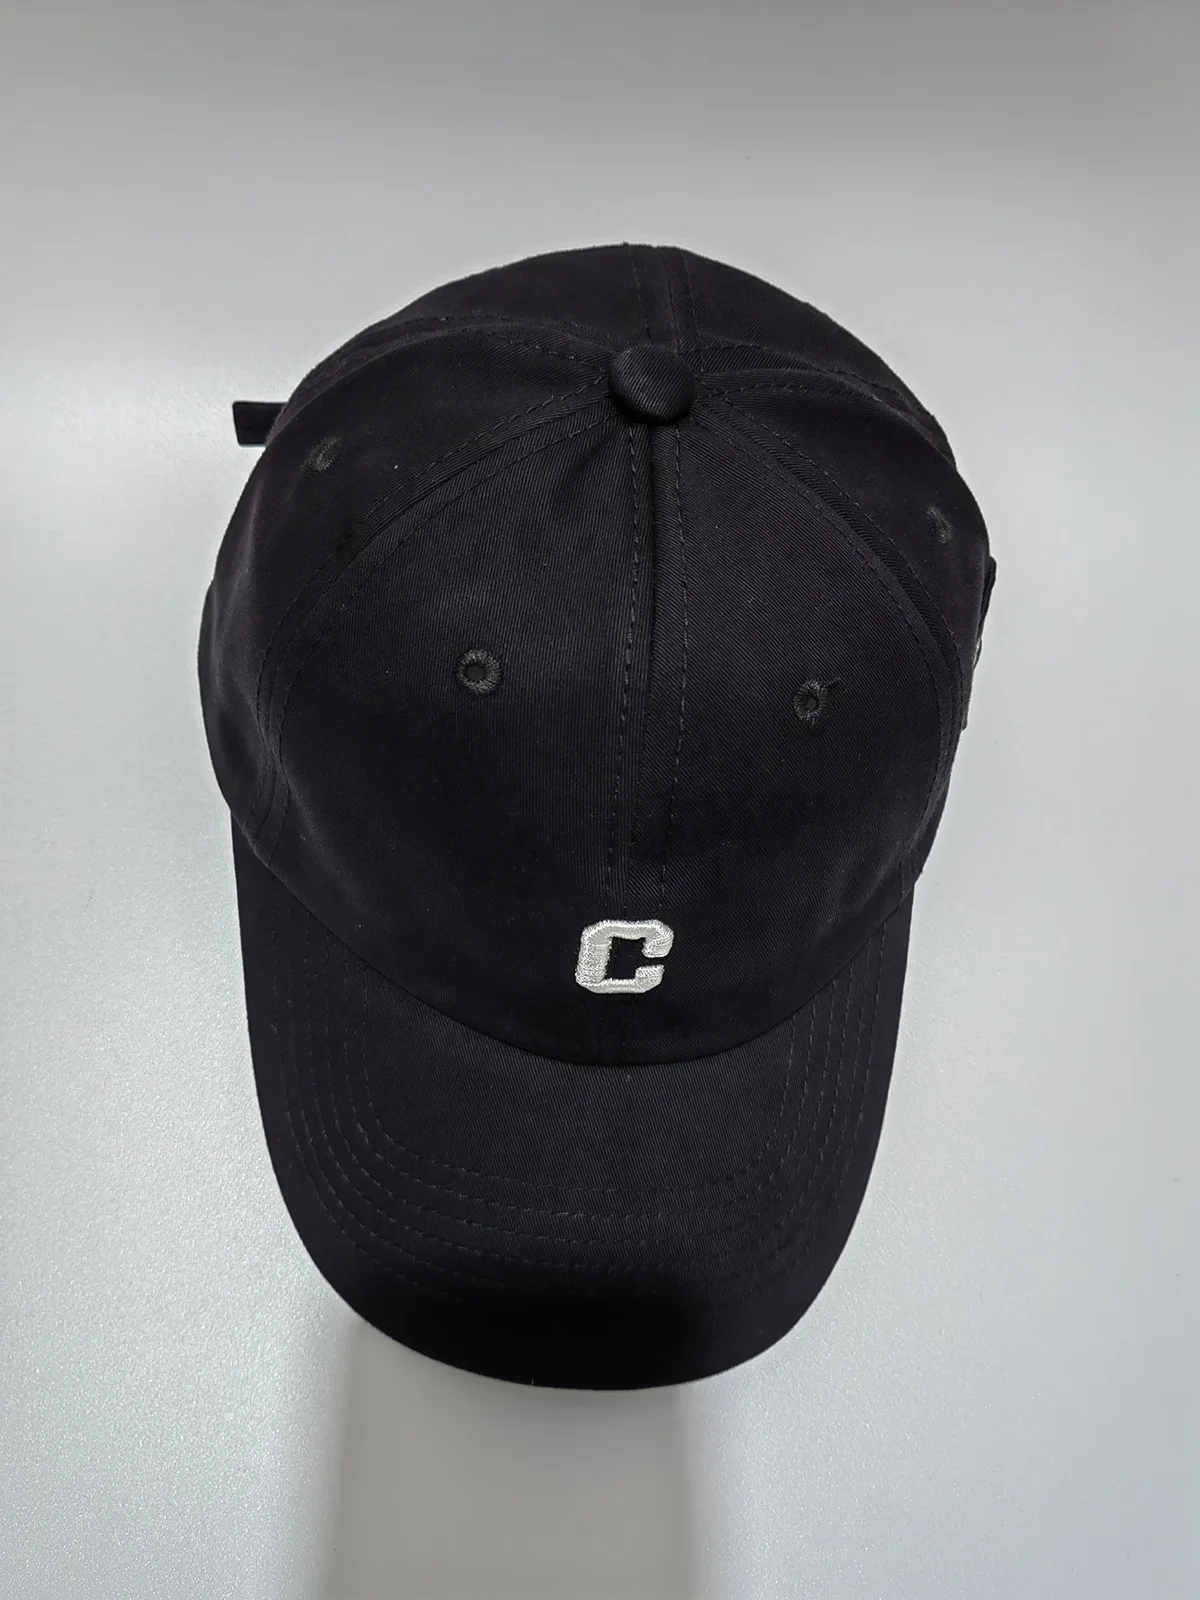 Fashion Baseball Cap For Men And Women Simple Snapback Hat Cotton 3D Letter C Embroidered Side Patch Spring Autumn Sun Visor Cap